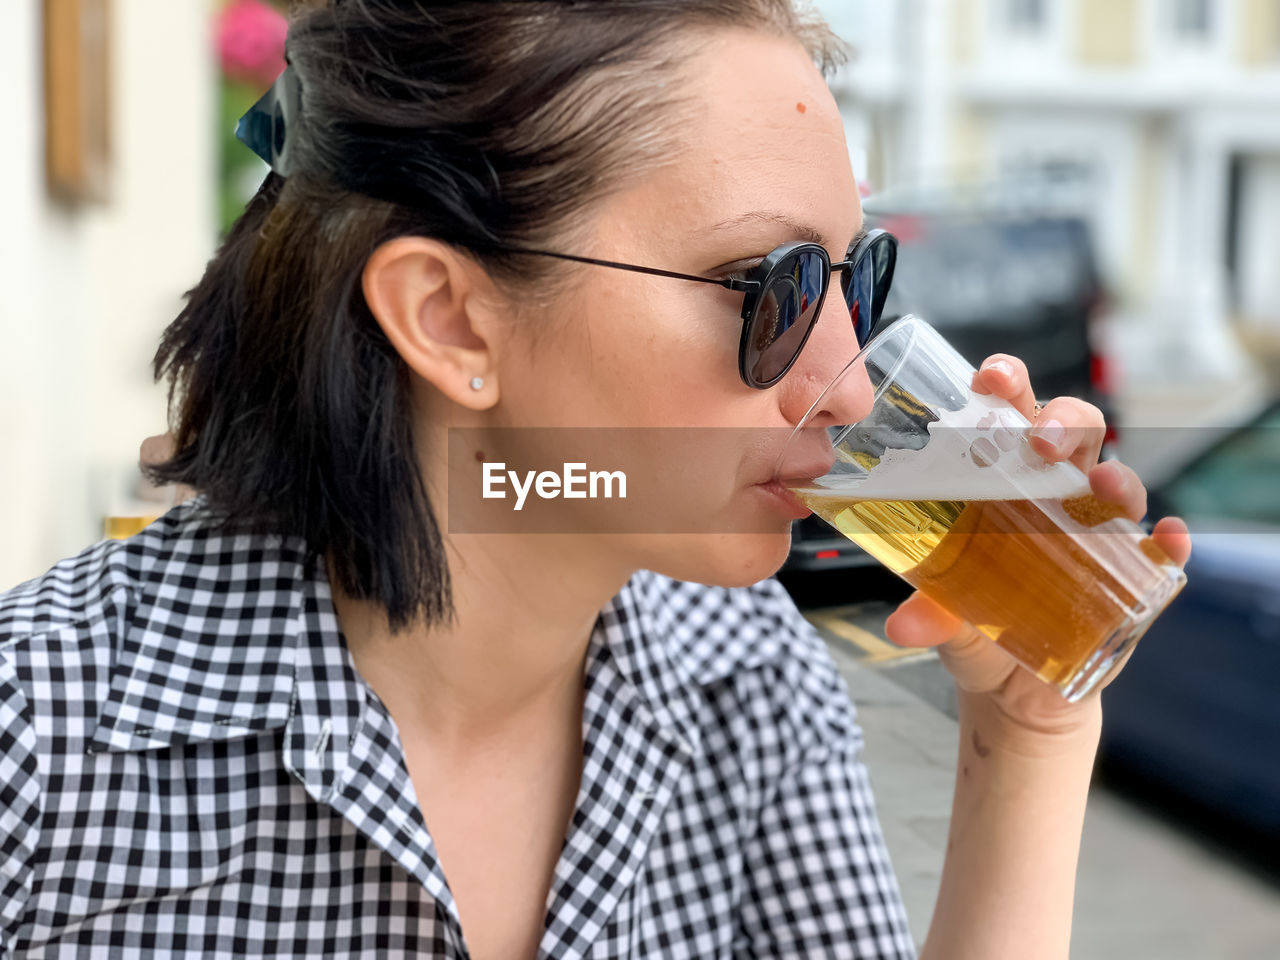 Young woman is drinking beer in a cafe or restaurant pub outdoor. drinking alcohol lager or ale beer